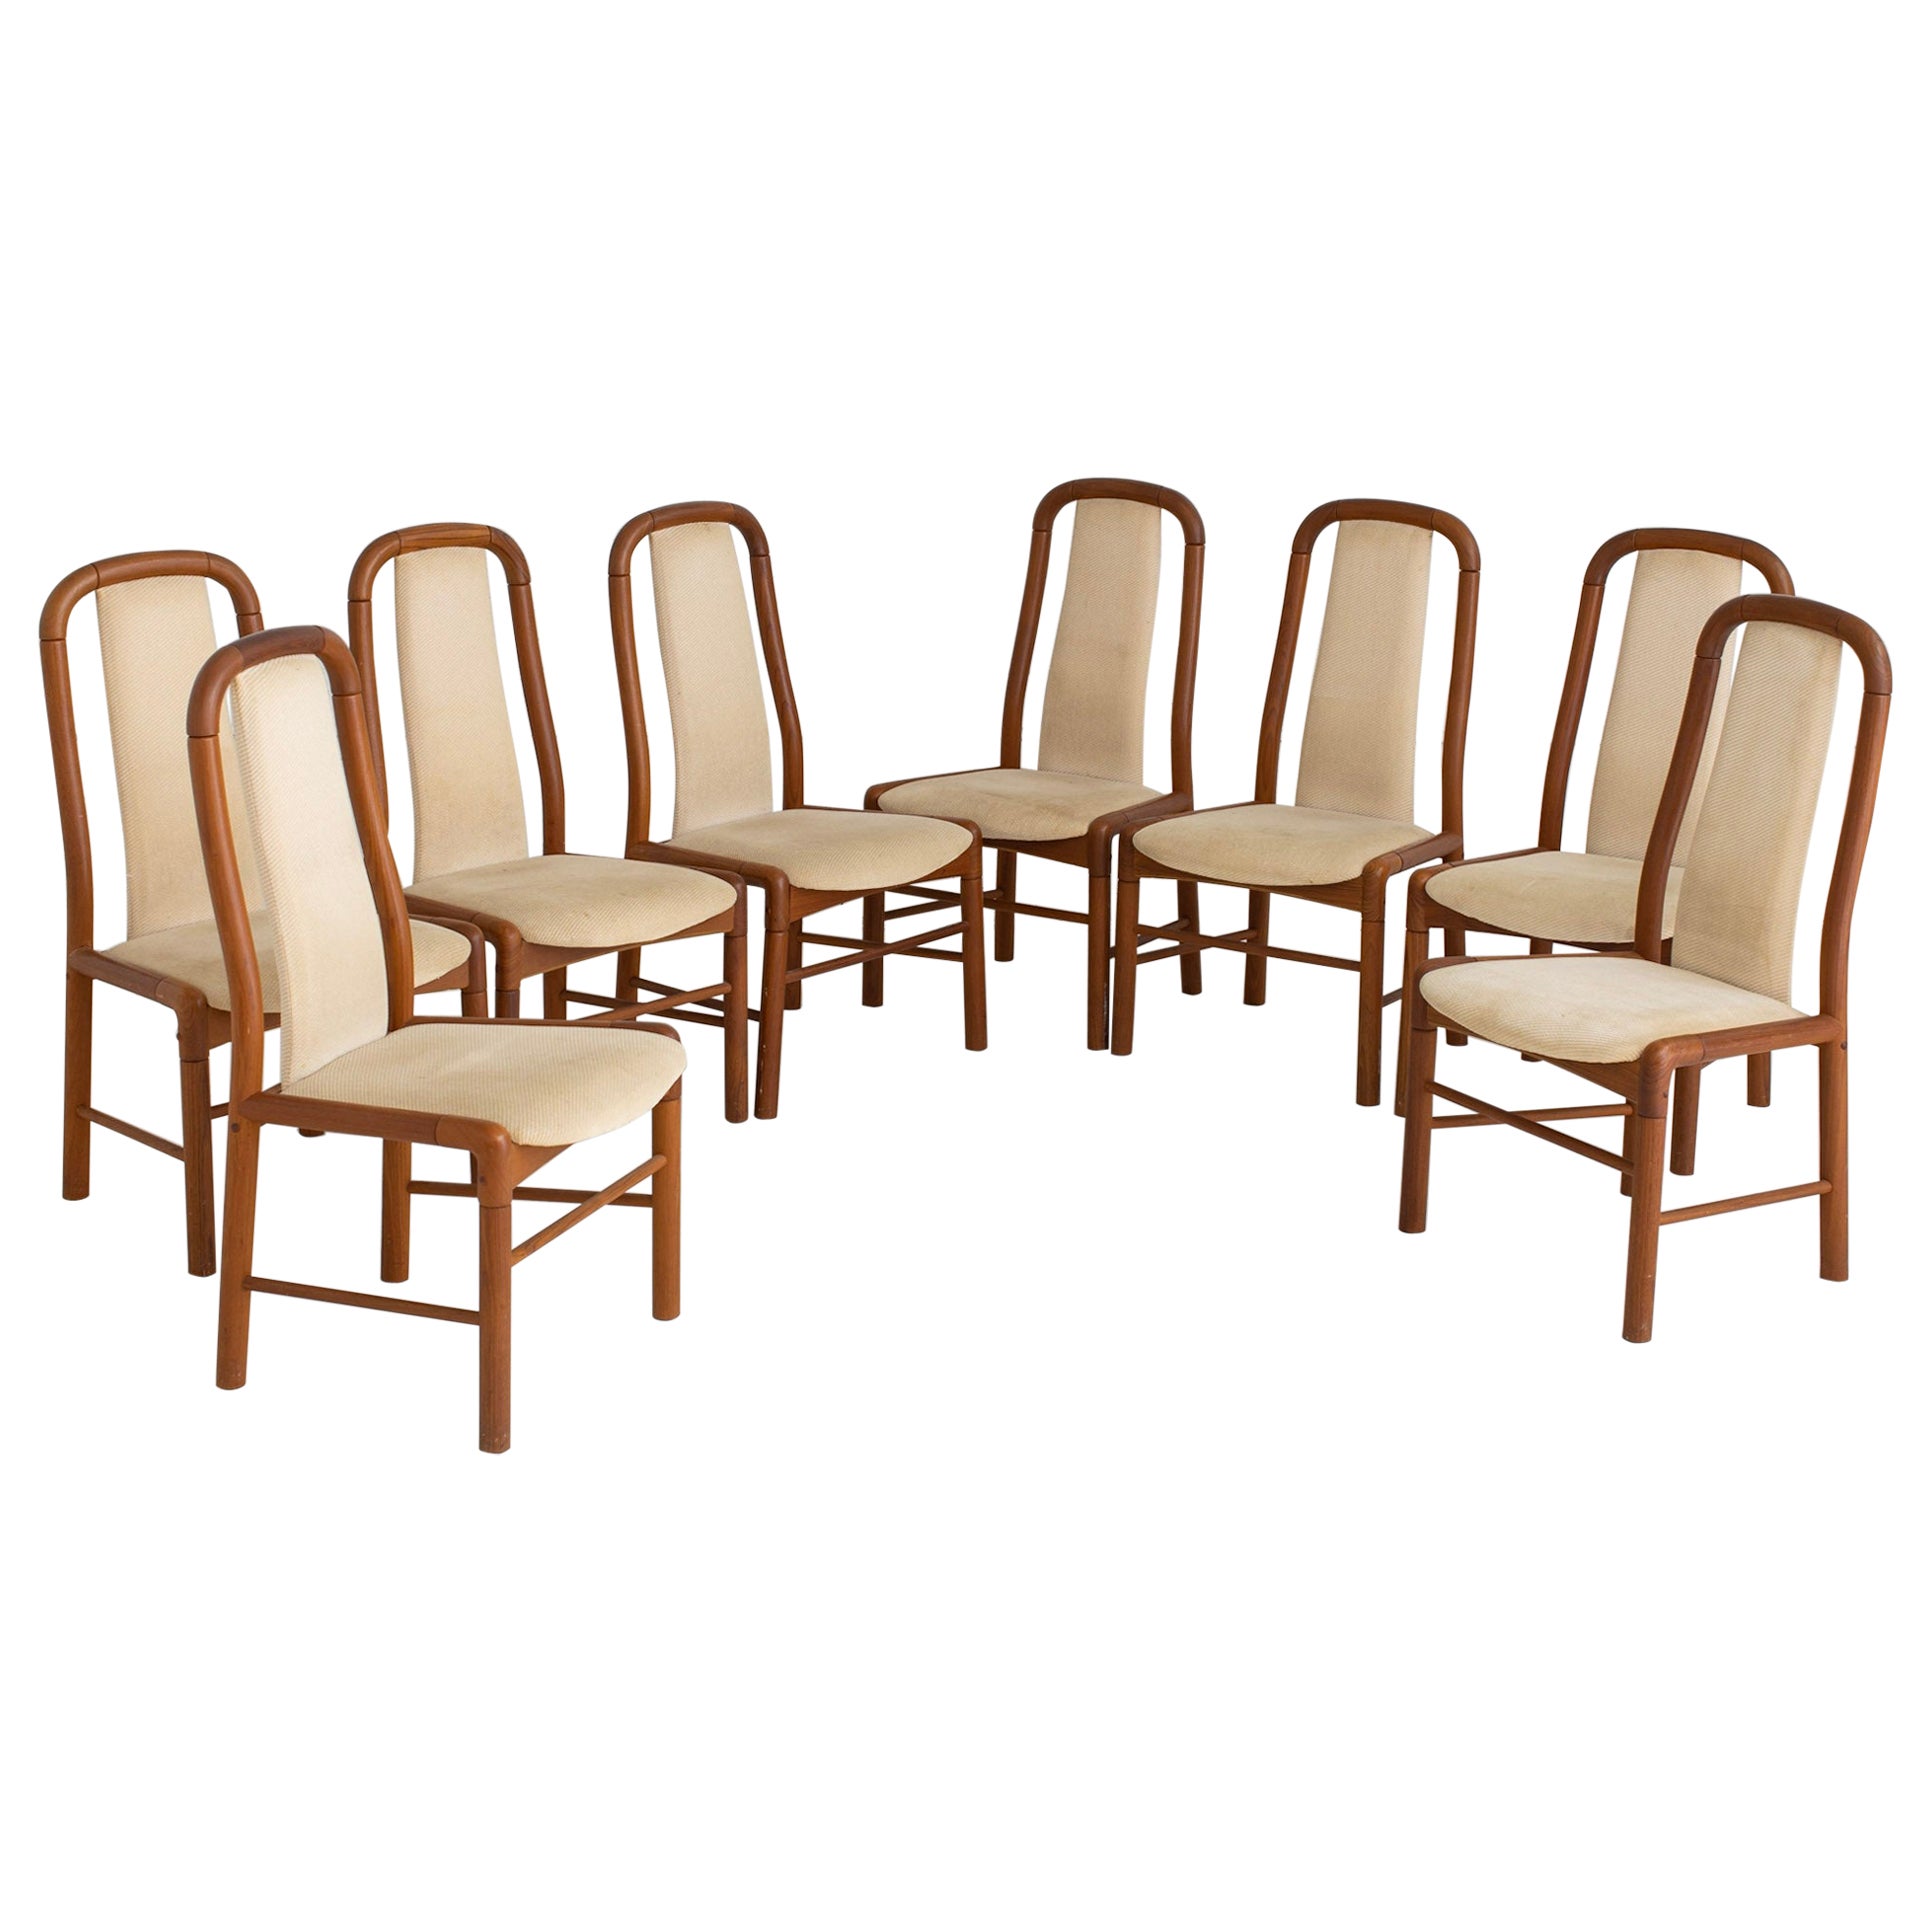 Benny Linden Design Teak and Cream Upholstered Dining Chairs, Set of 8